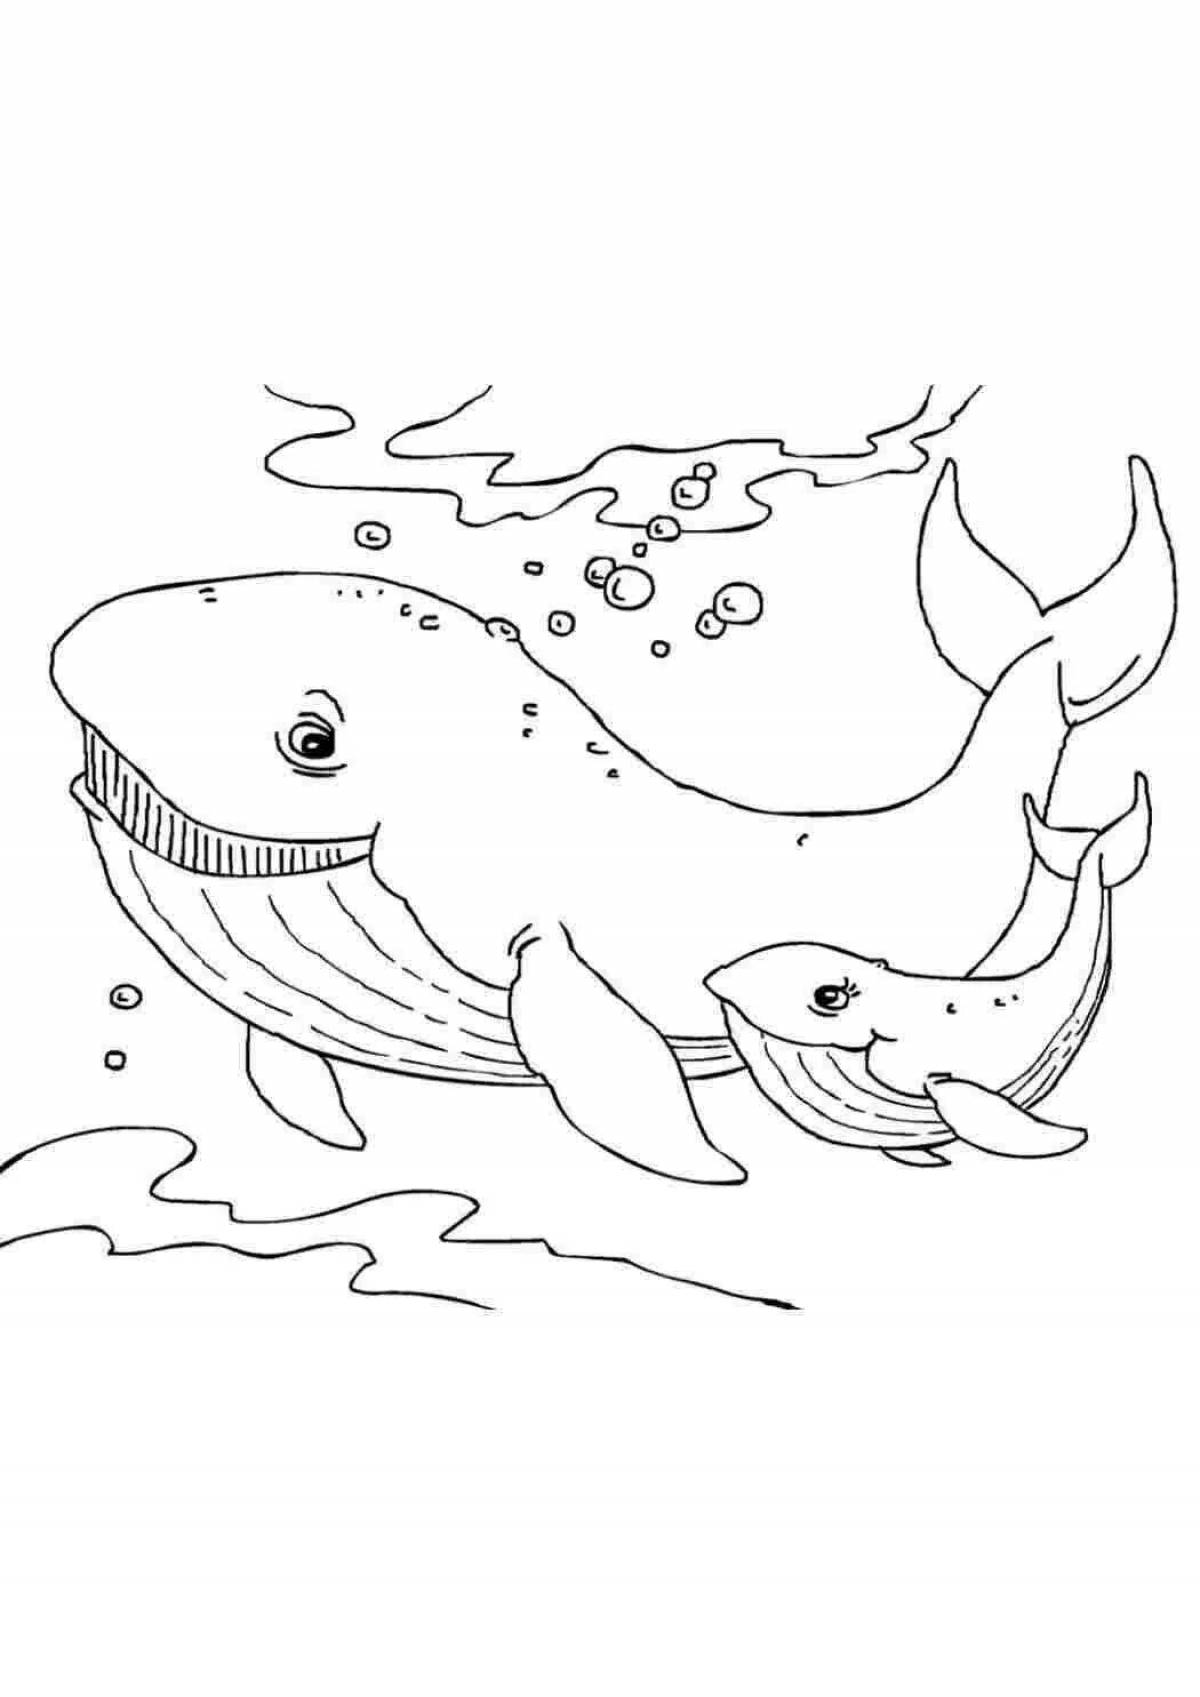 Glitter coloring drawing of a whale